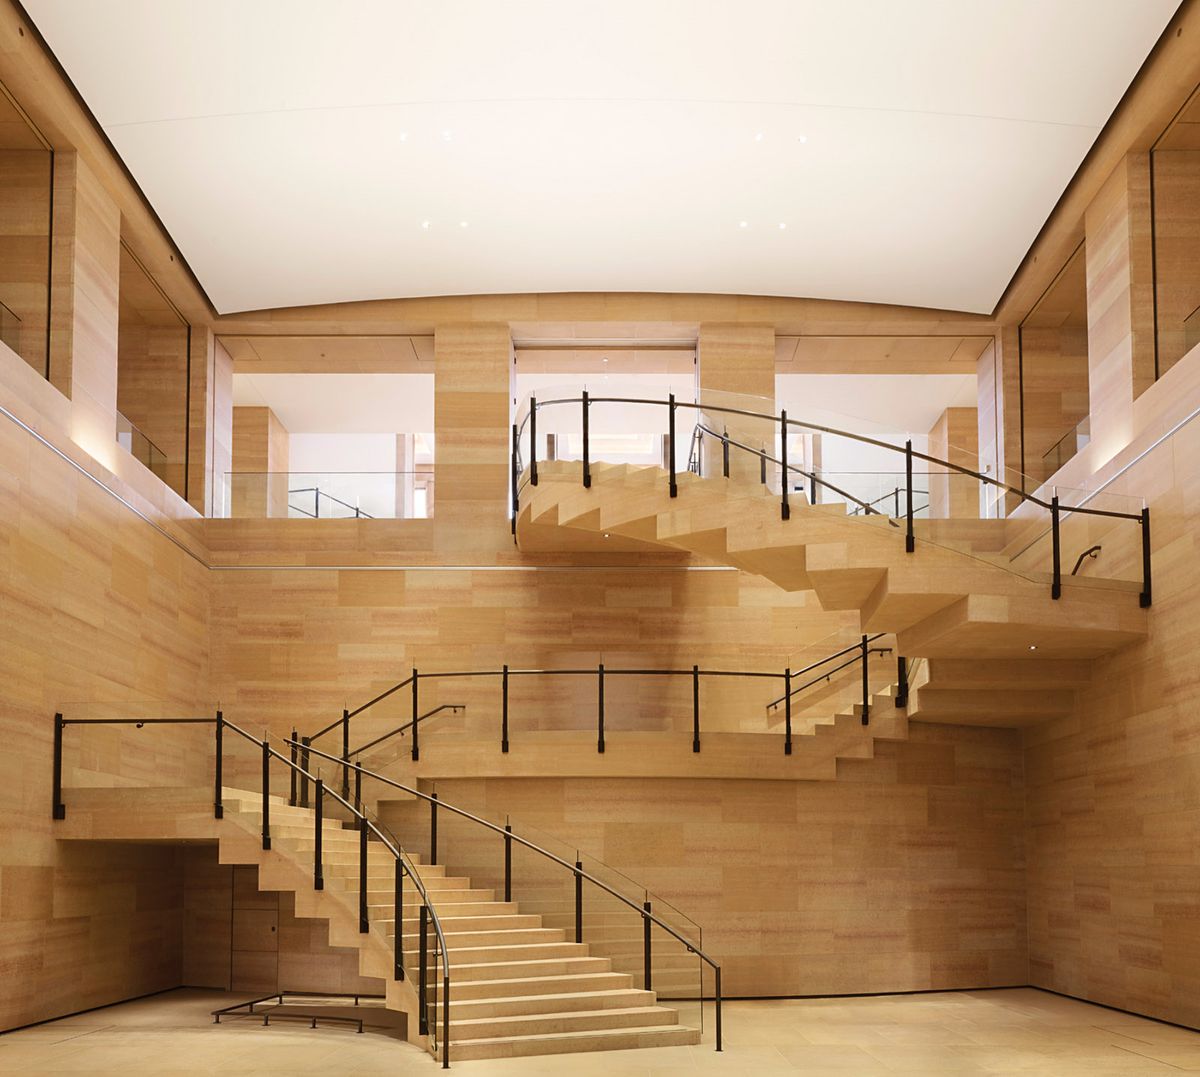 The Williams Forum at the Philadelphia Museum of Art, looking west into Lenfest Hall from the ground level. The architect Frank Gehry demolished a former auditorium and replaced it with a dramatic 40ft-high open space Photo: Elizabeth Leitzell; courtesy of the Philadelphia Museum of Art